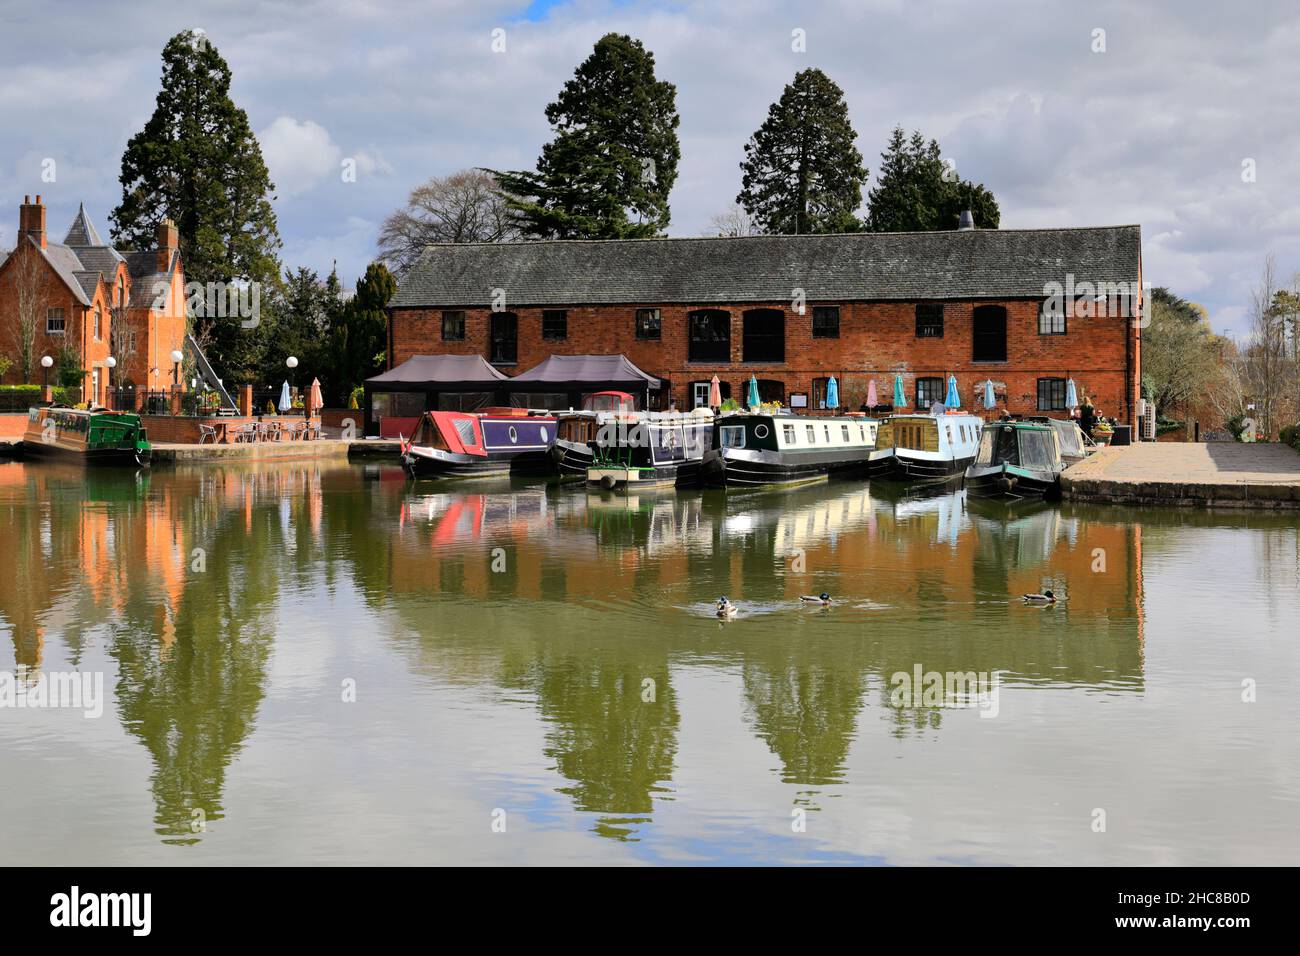 Narrowboats at the Grand Union Canal Basin, Market Harborough town, Leicestershire, England; UK Stock Photo